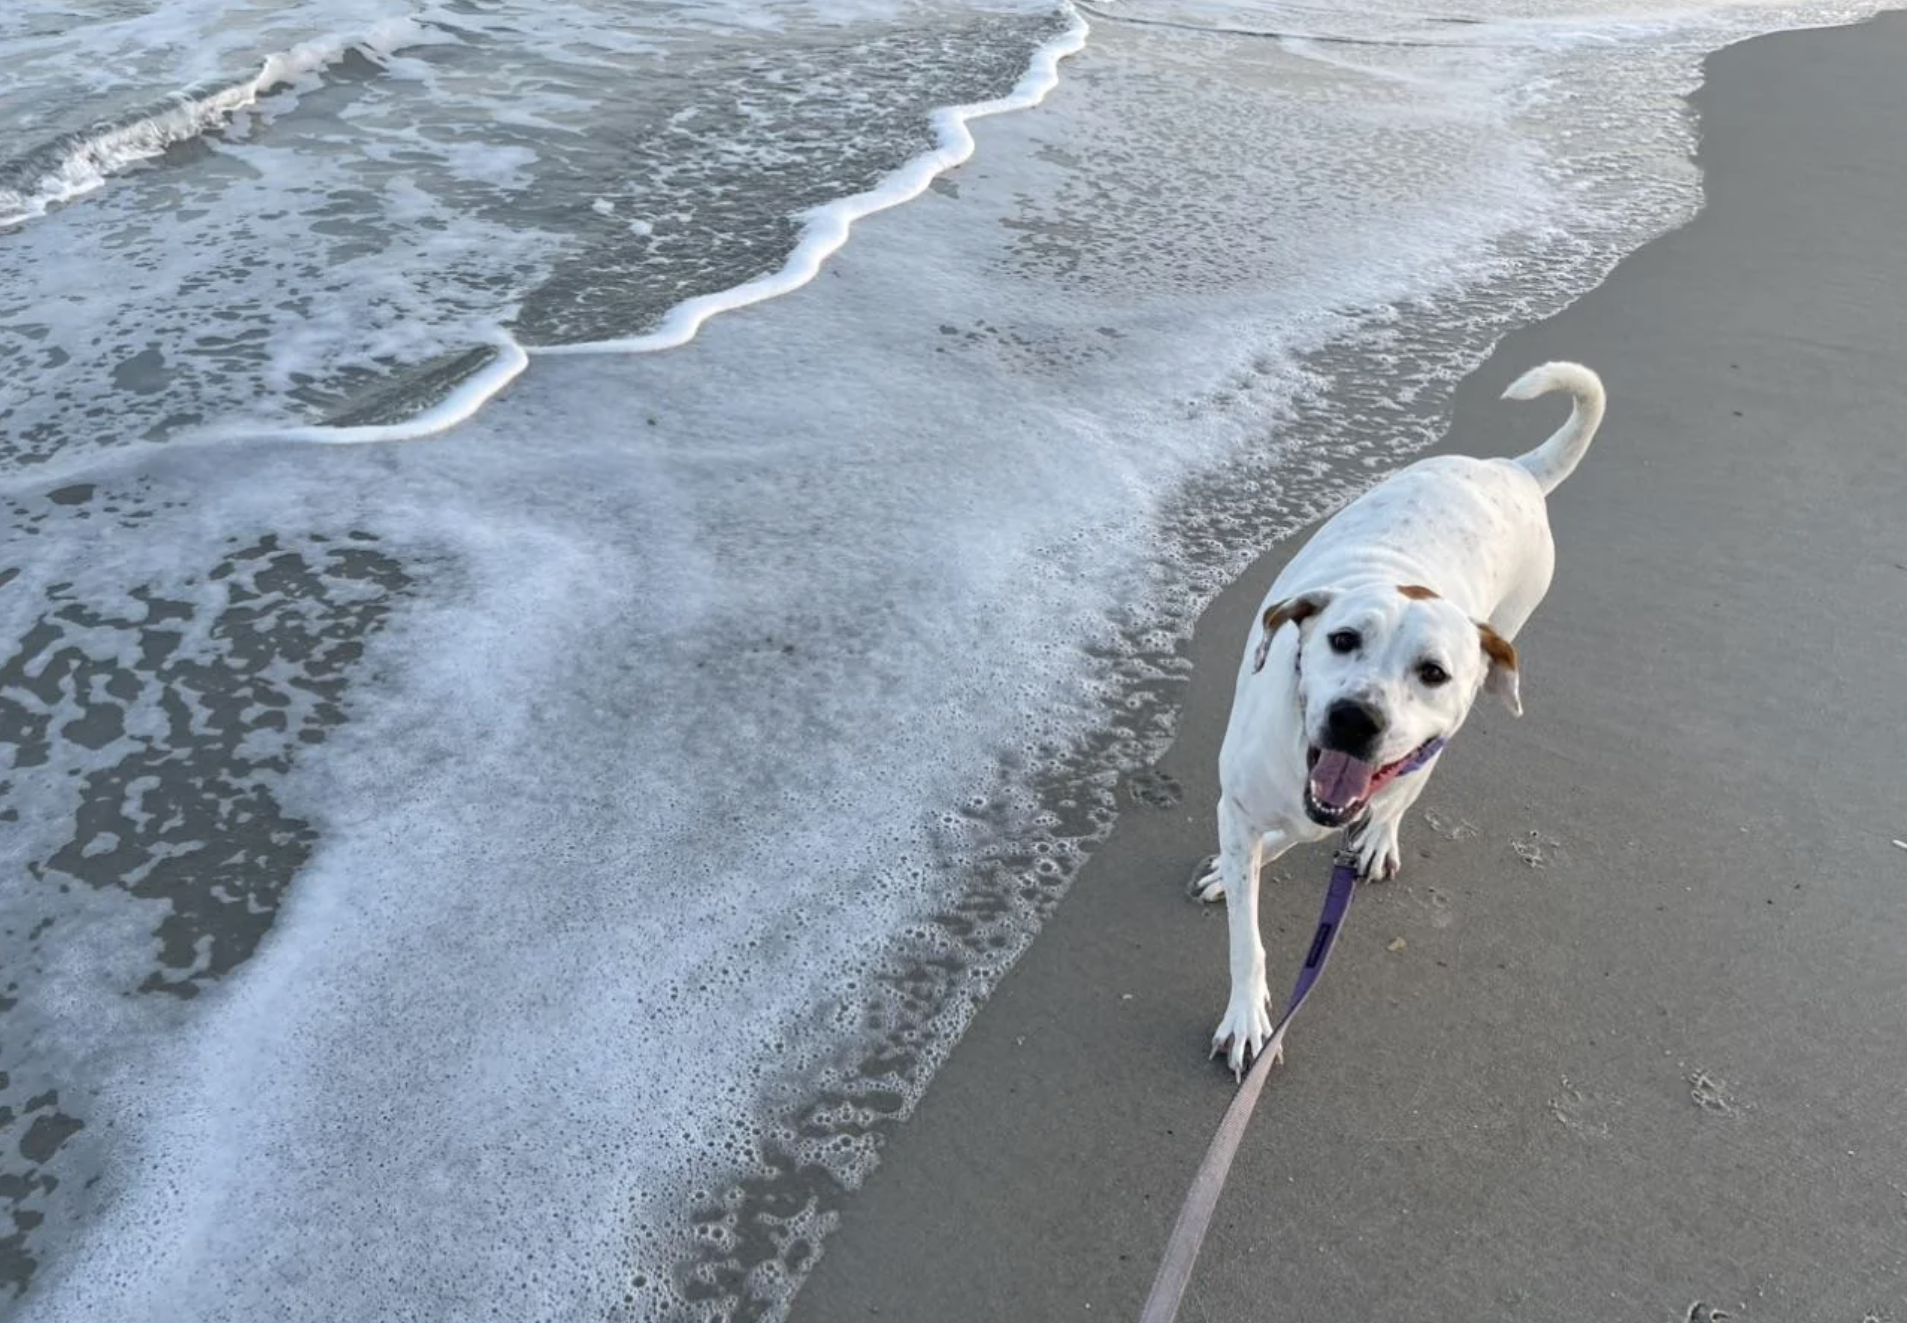 A joyful dog on a leash at the beach with waves approaching